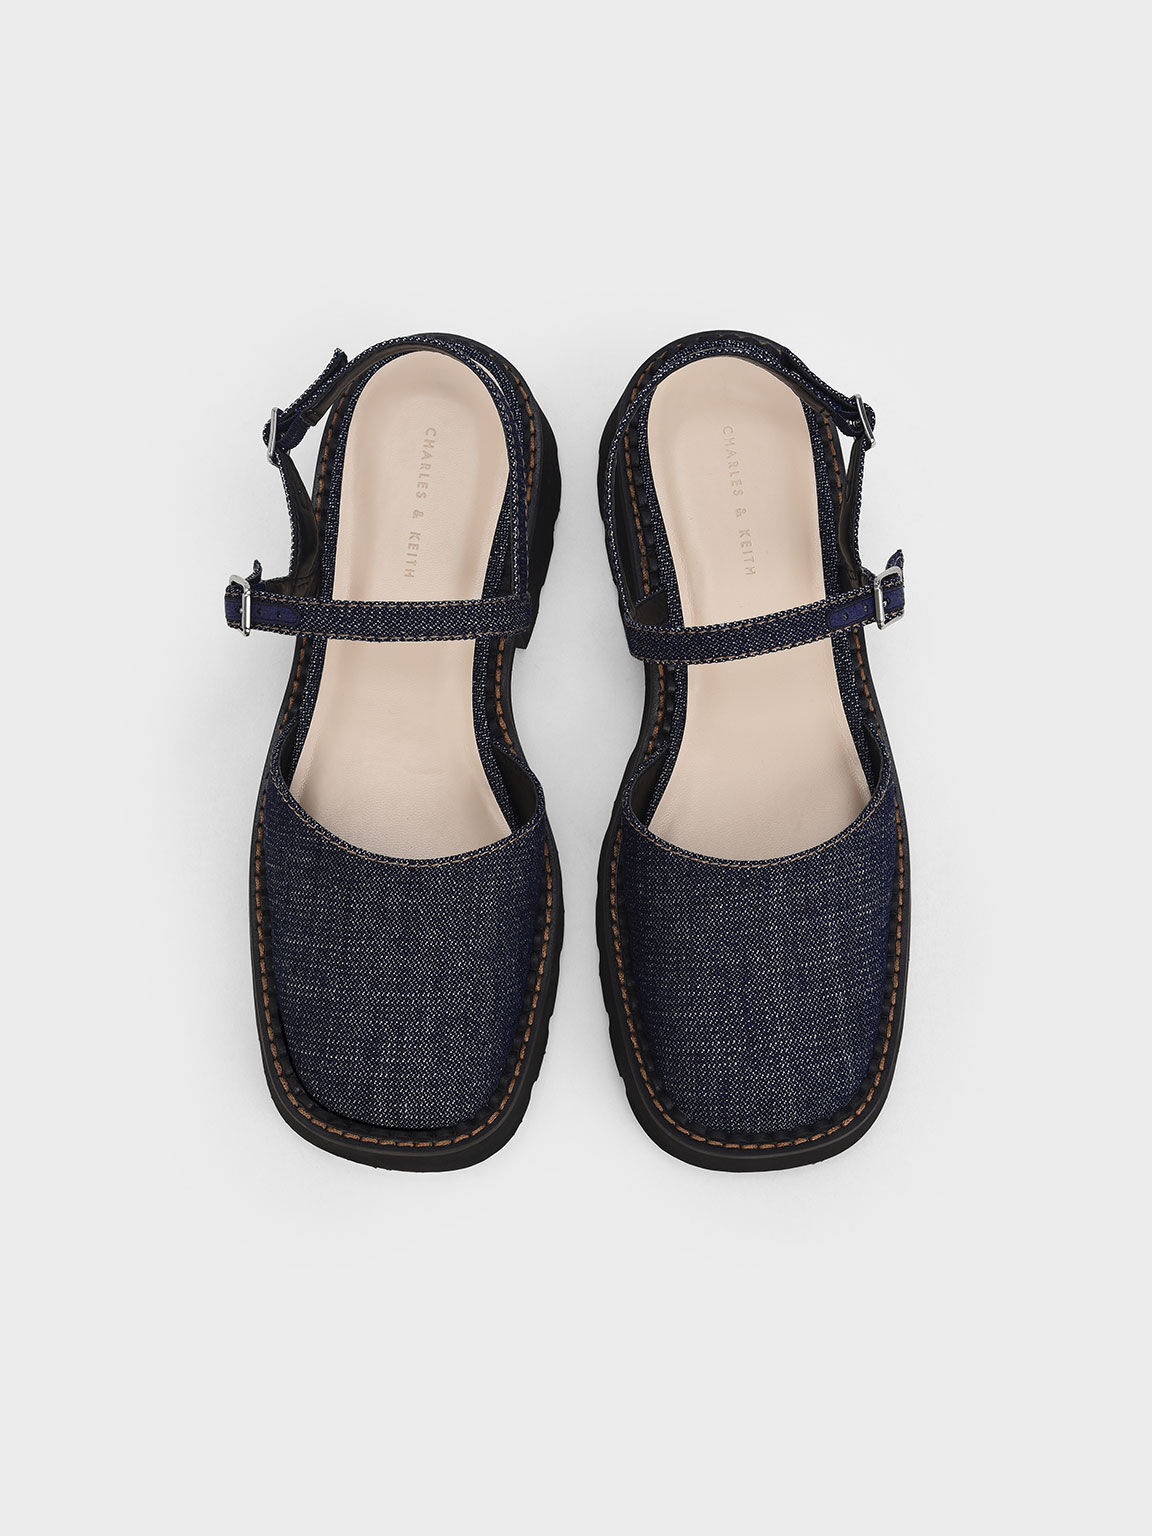 Cleated Sole Ankle-Strap Denim Shoes, Dark Blue, hi-res